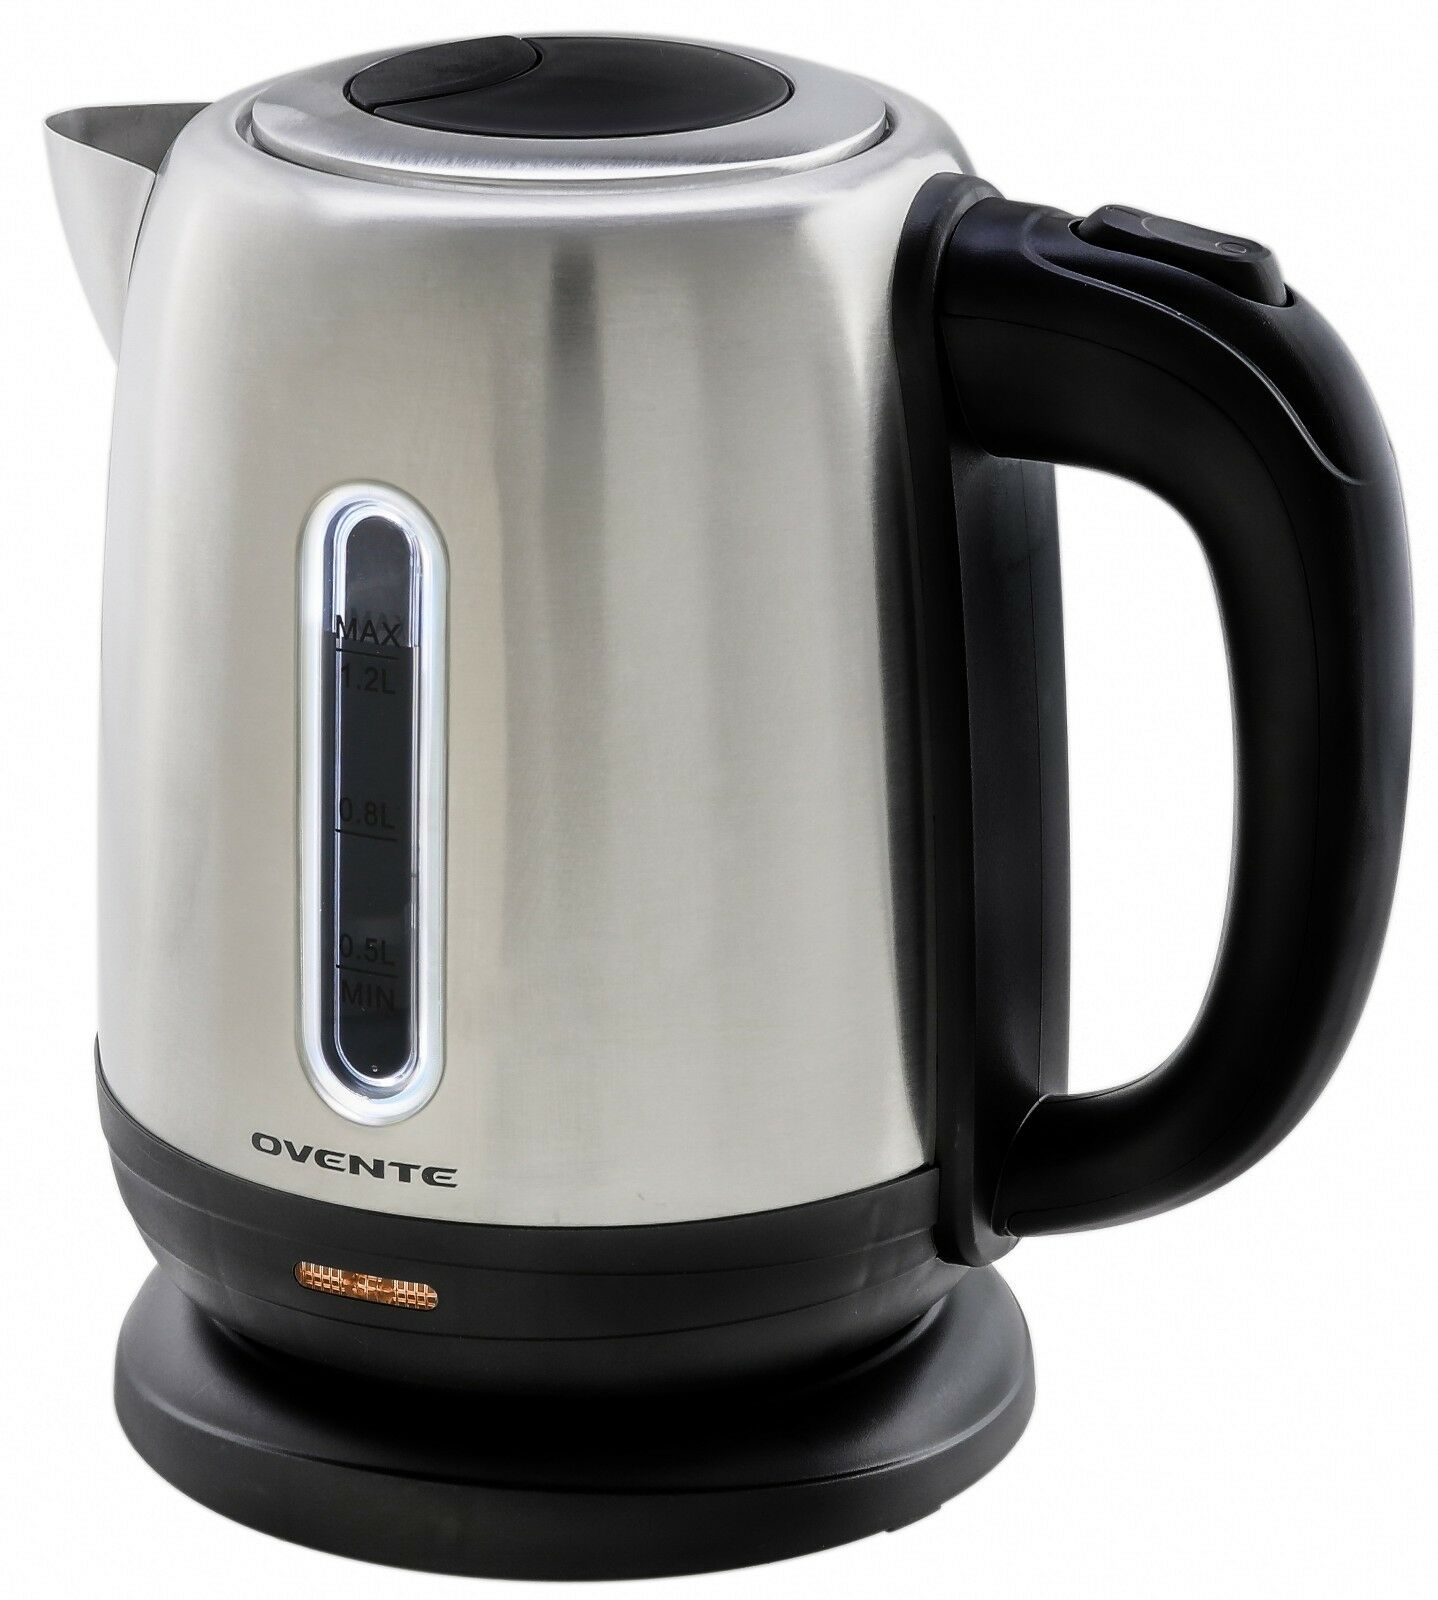 Ovente Electric Stainless Steel Kettle 1.2l Portable Auto Shut-off Silver Ks22s